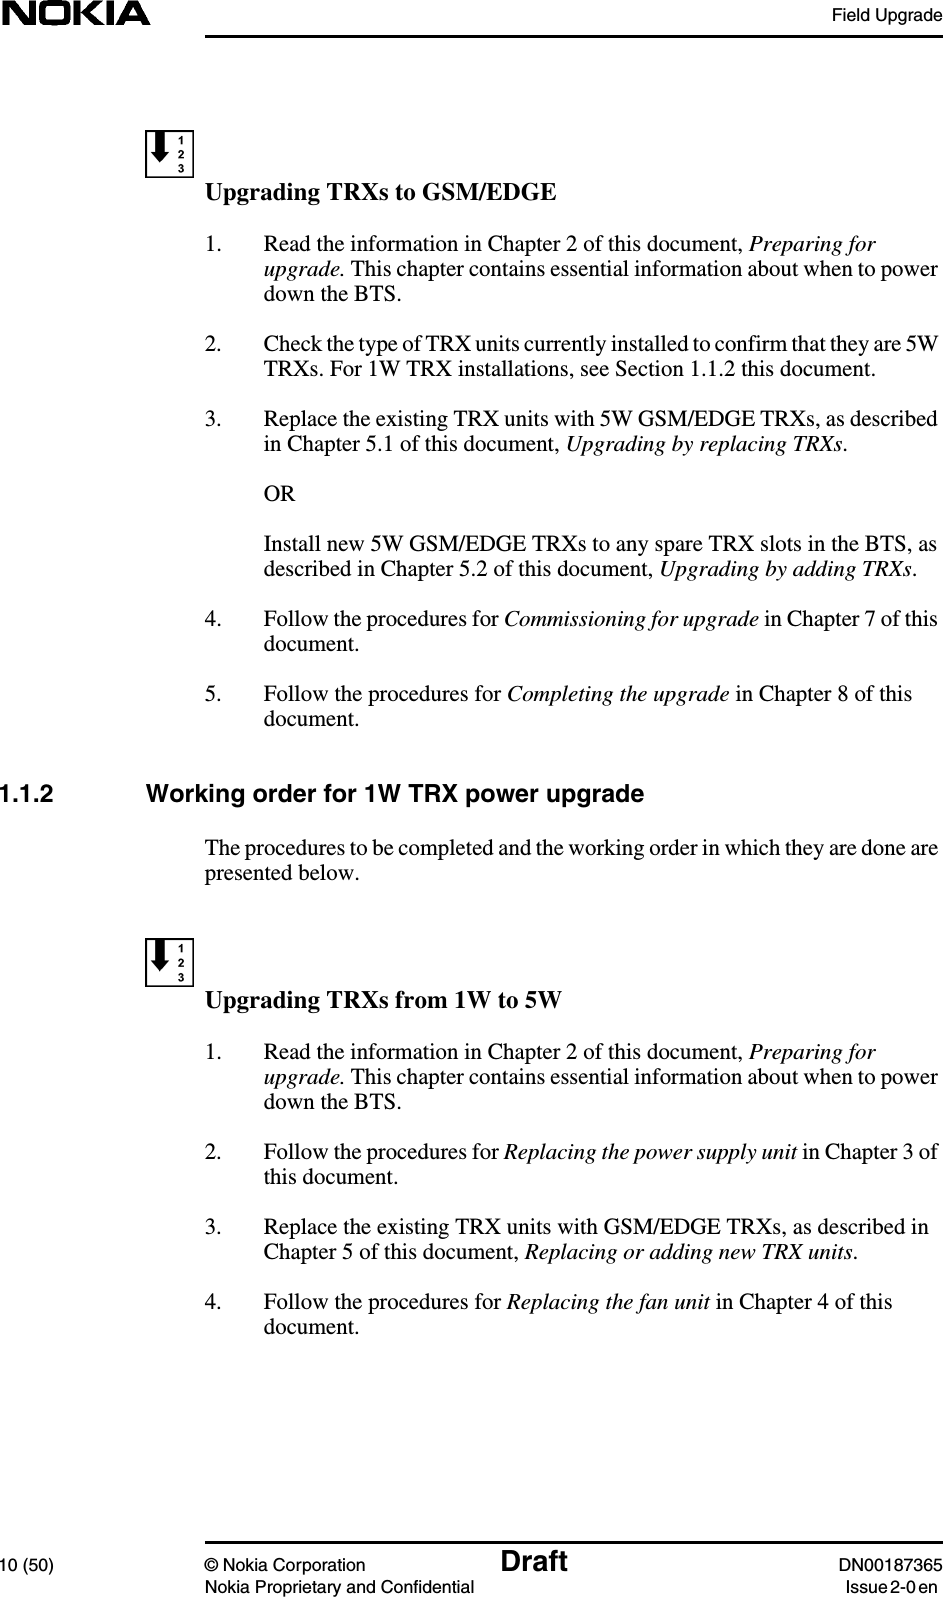 Field Upgrade10 (50) © Nokia Corporation Draft DN00187365Nokia Proprietary and Confidential Issue 2-0 enUpgrading TRXs to GSM/EDGE1. Read the information in Chapter 2 of this document, Preparing forupgrade. This chapter contains essential information about when to powerdown the BTS.2. Check the type of TRX units currently installed to confirm that they are 5WTRXs. For 1W TRX installations, see Section 1.1.2 this document.3. Replace the existing TRX units with 5W GSM/EDGE TRXs, as describedin Chapter 5.1 of this document, Upgrading by replacing TRXs.ORInstall new 5W GSM/EDGE TRXs to any spare TRX slots in the BTS, asdescribed in Chapter 5.2 of this document, Upgrading by adding TRXs.4. Follow the procedures for Commissioning for upgrade in Chapter 7 of thisdocument.5. Follow the procedures for Completing the upgrade in Chapter 8 of thisdocument.1.1.2 Working order for 1W TRX power upgradeThe procedures to be completed and the working order in which they are done arepresented below.Upgrading TRXs from 1W to 5W1. Read the information in Chapter 2 of this document, Preparing forupgrade. This chapter contains essential information about when to powerdown the BTS.2. Follow the procedures for Replacing the power supply unit in Chapter 3 ofthis document.3. Replace the existing TRX units with GSM/EDGE TRXs, as described inChapter 5 of this document, Replacing or adding new TRX units.4. Follow the procedures for Replacing the fan unit in Chapter 4 of thisdocument.